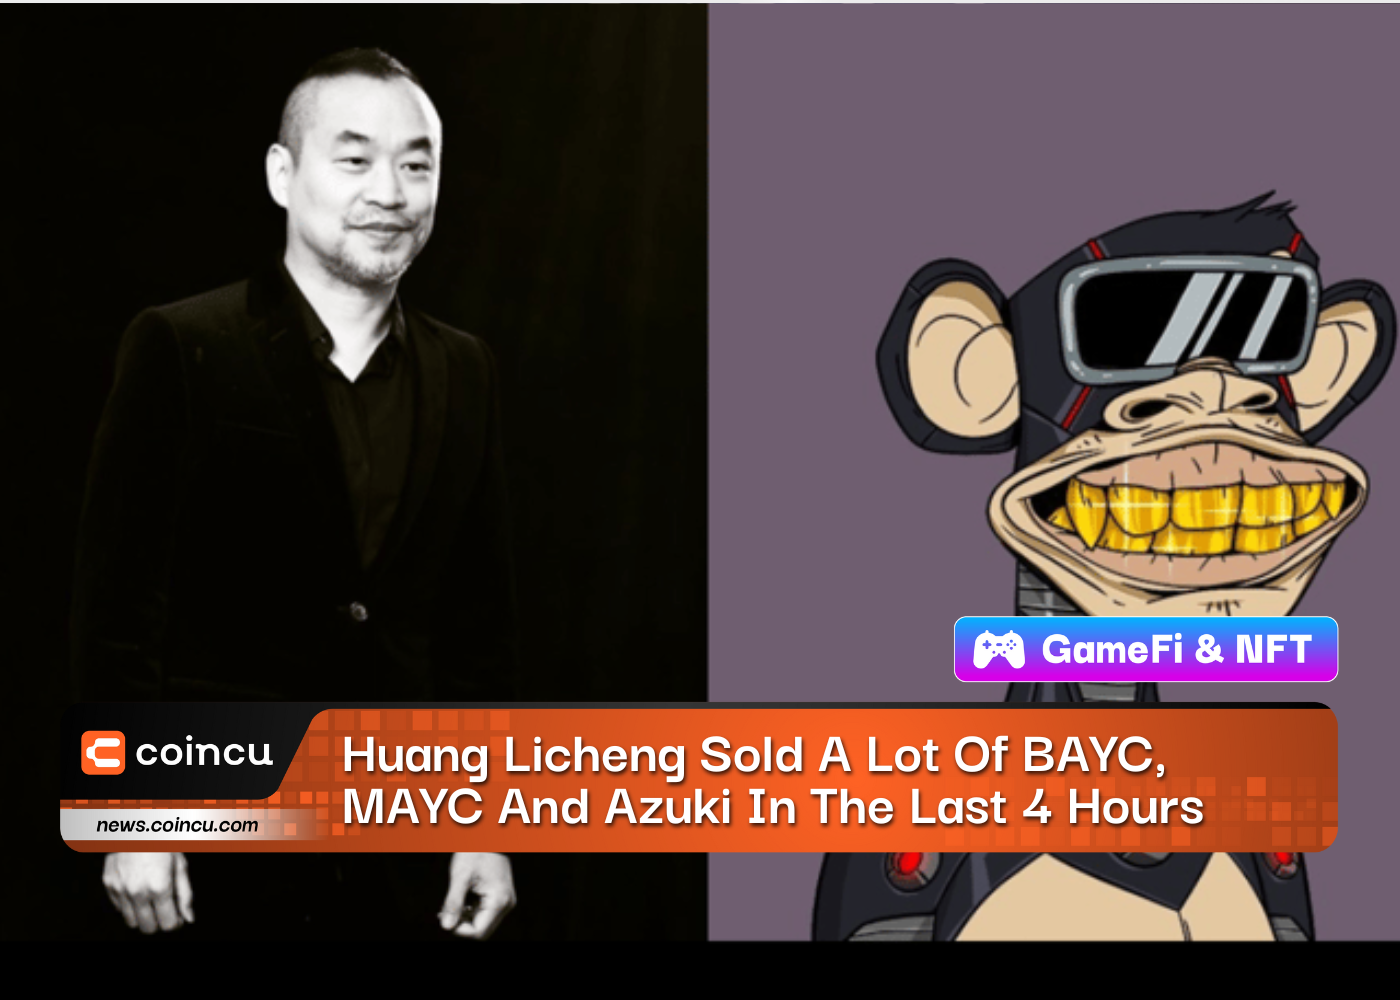 Huang Licheng Sold A Lot Of BAYC, MAYC And Azuki In The Last 4 Hours